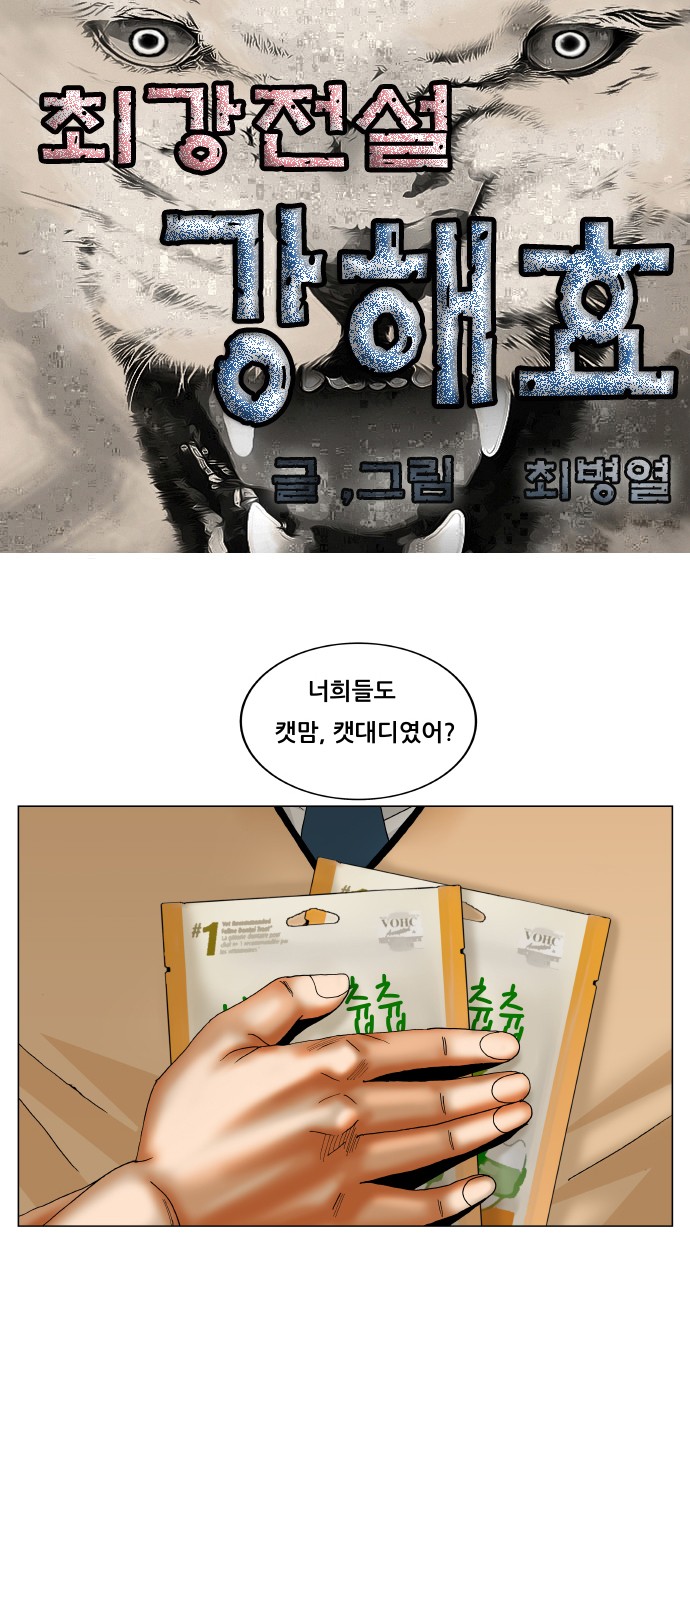 Ultimate Legend - Kang Hae Hyo - Chapter 253 - Page 1